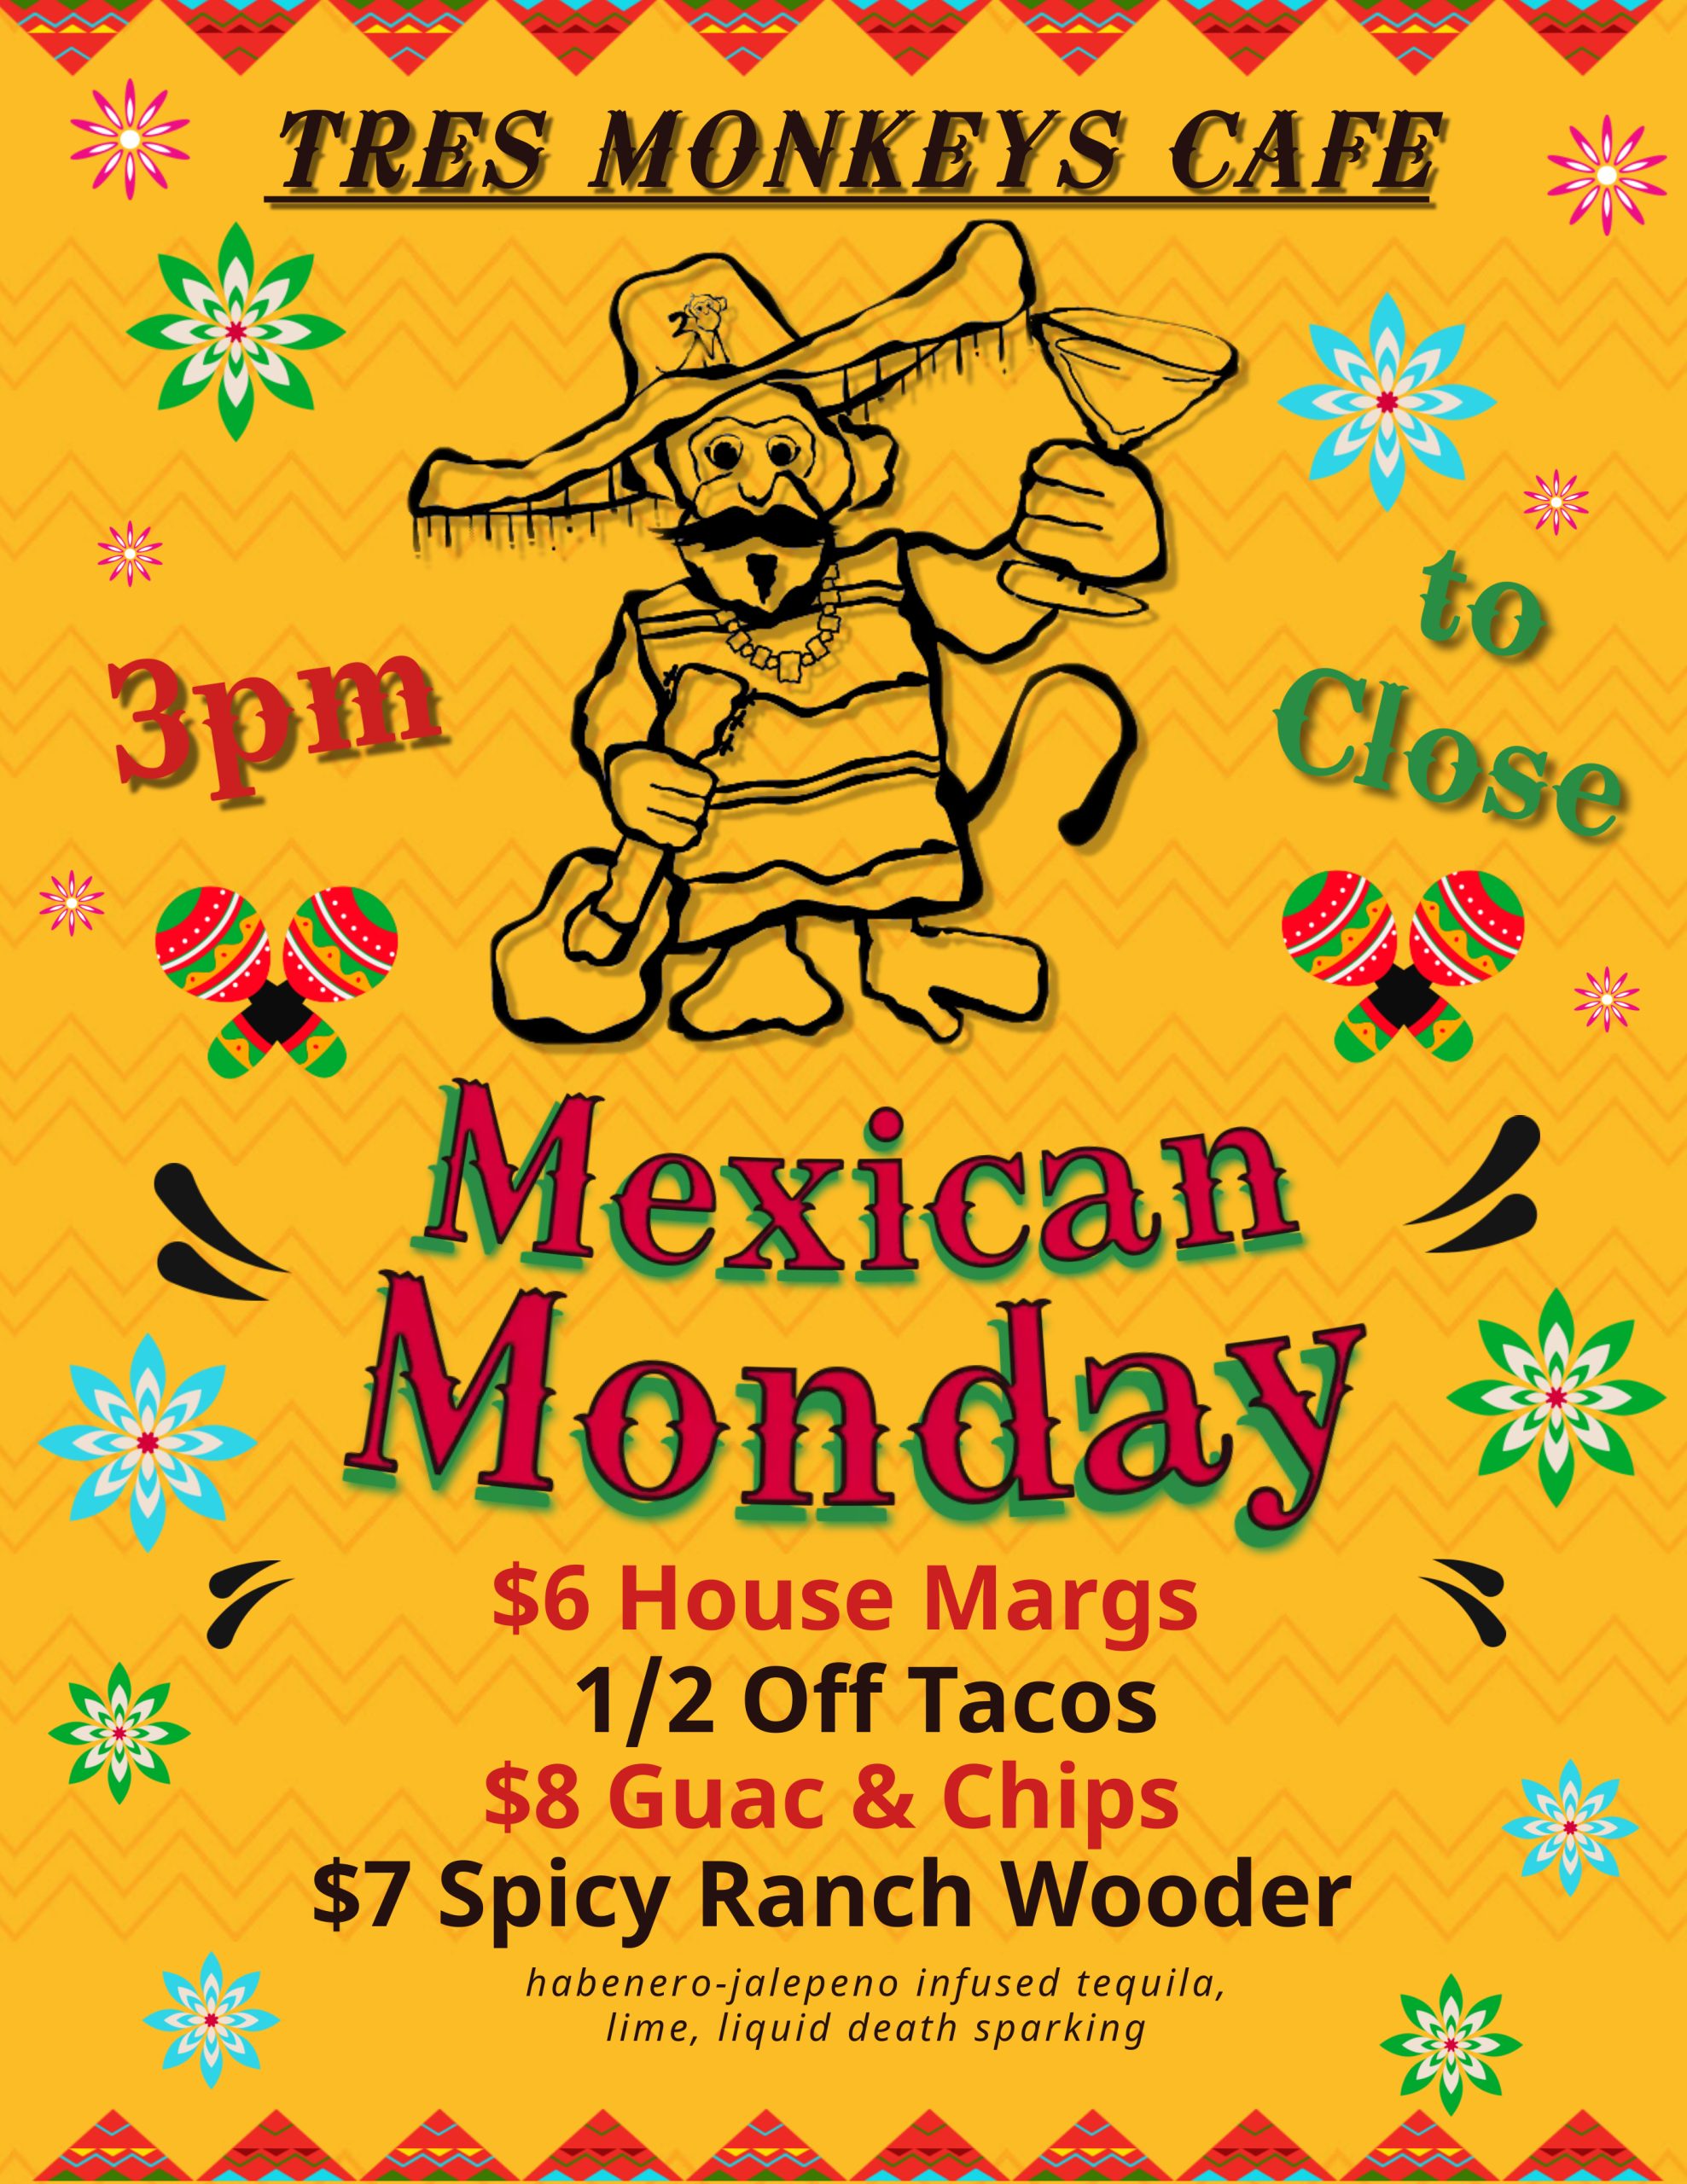 A flyer for mexican monday at tres monkey's cafe.